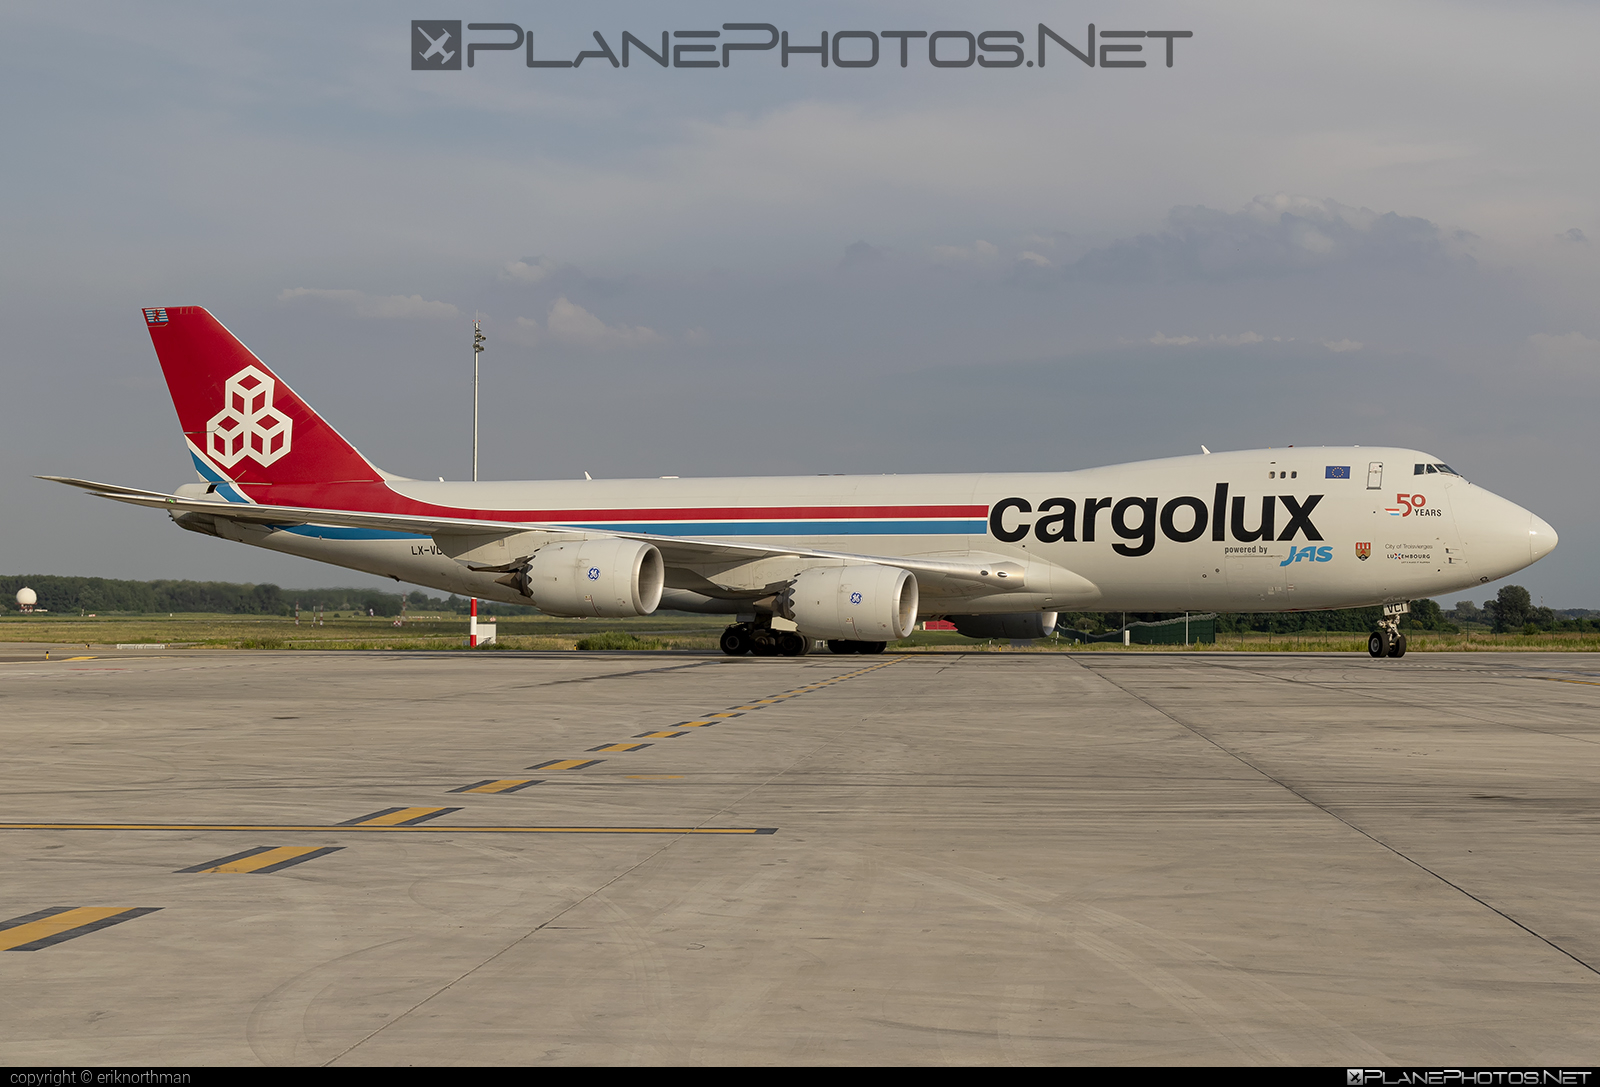 Boeing 747-8F - LX-VCI operated by Cargolux Airlines International #b747 #b747f #b747freighter #boeing #boeing747 #cargolux #jumbo